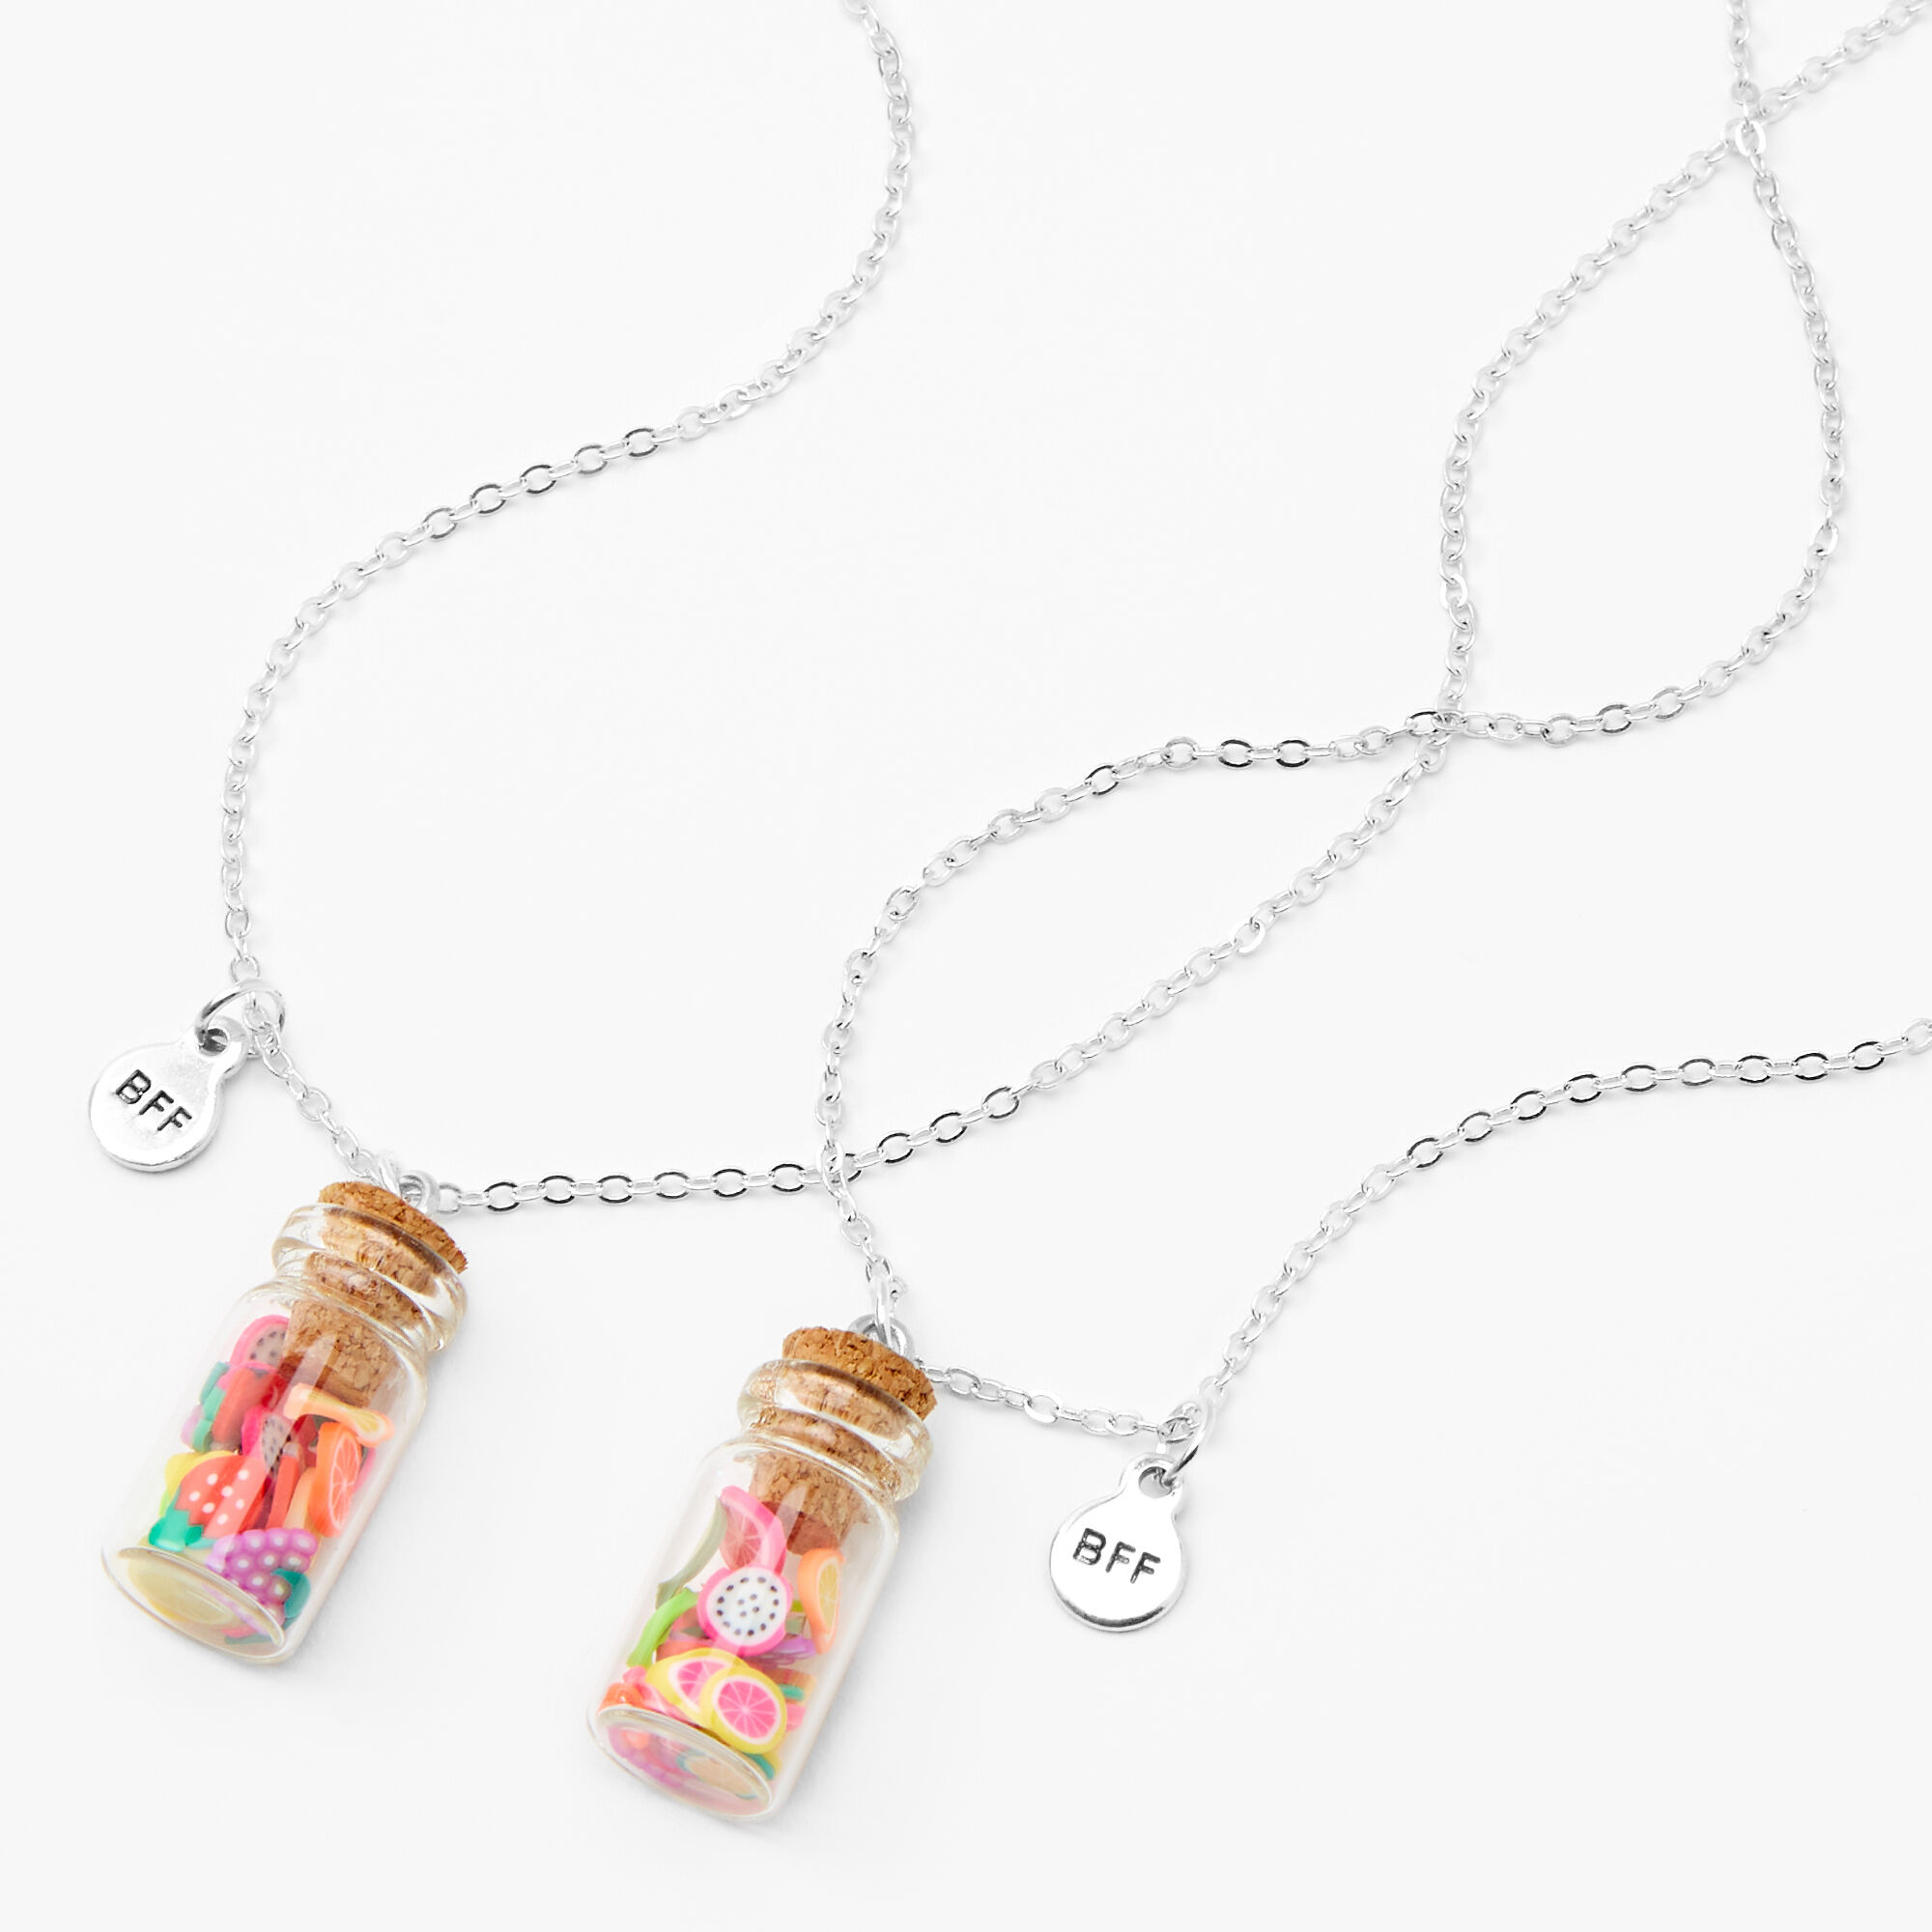 Claire's Best Friends Mood Lock & Key Pendant Necklaces - 2 Pack | Westland  Mall